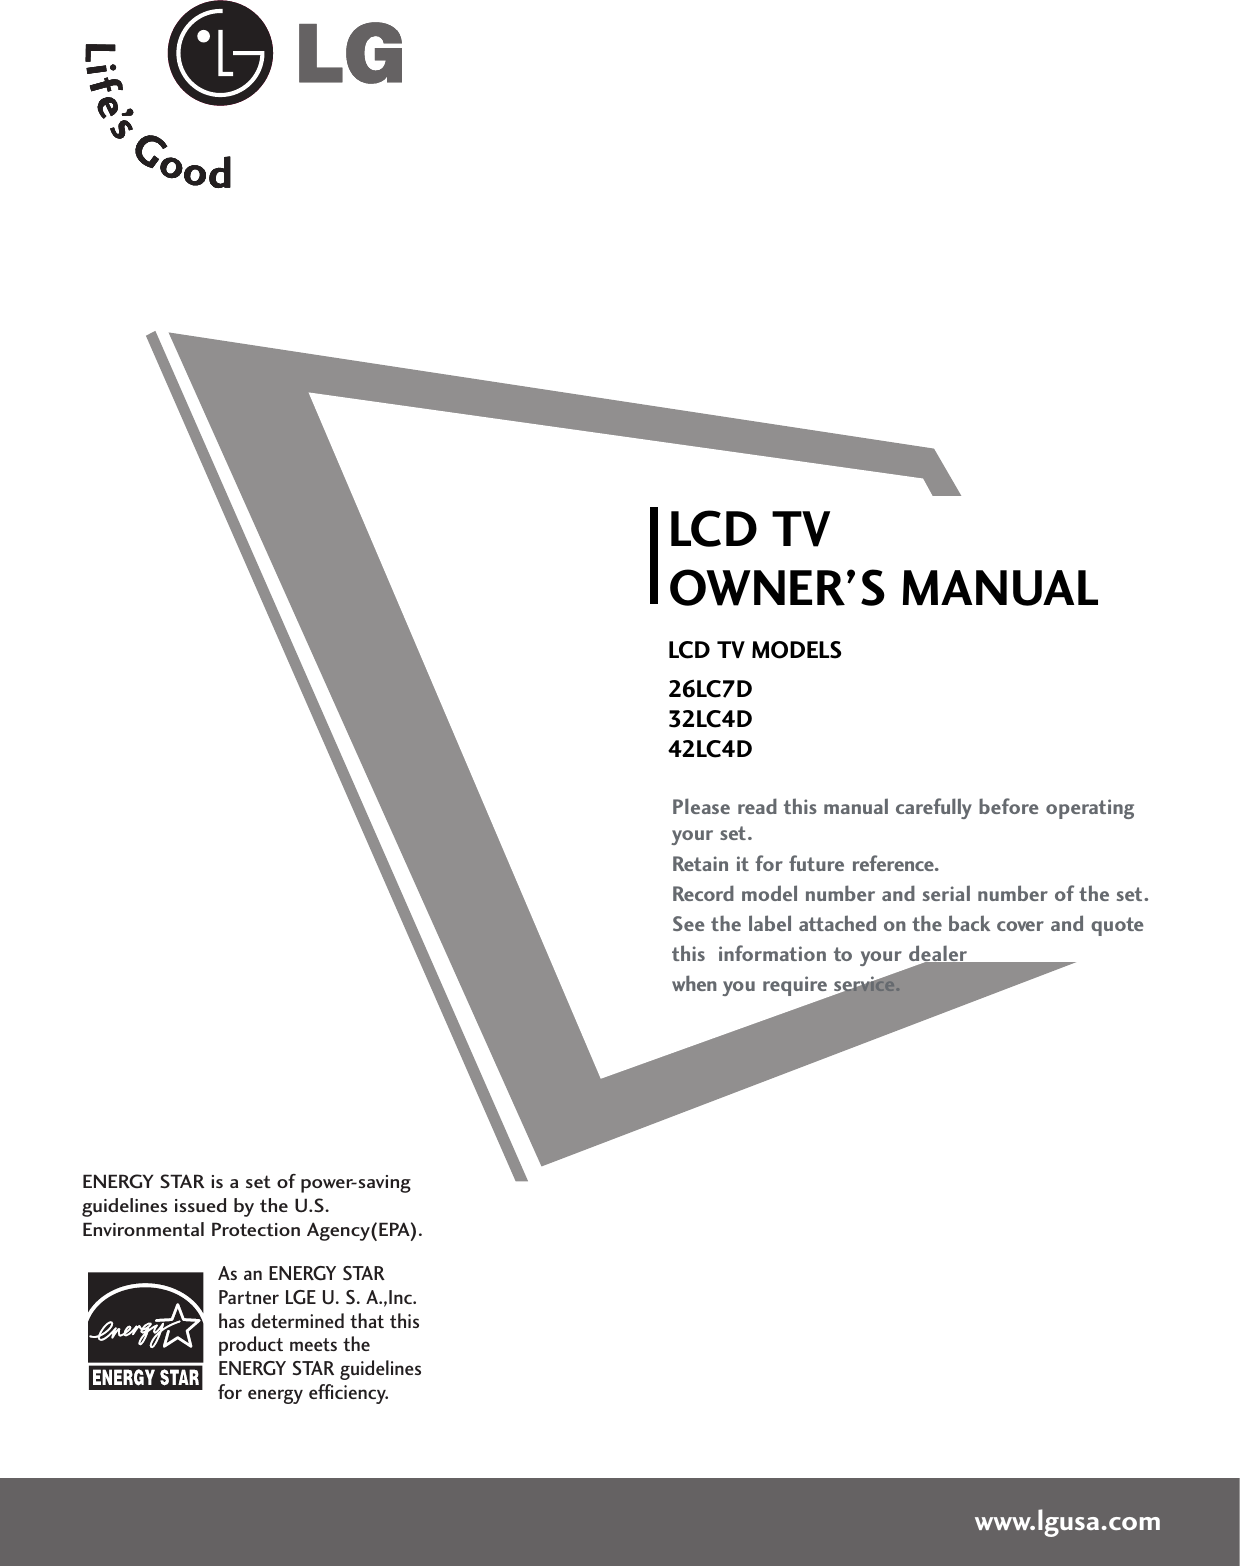 Please read this manual carefully before operatingyour set. Retain it for future reference.Record model number and serial number of the set. See the label attached on the back cover and quote this  information to your dealer when you require service.LCD TVOWNER’S MANUALLCD TV MODELS26LC7D32LC4D42LC4Dwww.lgusa.comAs an ENERGY STARPartner LGE U. S. A.,Inc.has determined that thisproduct meets theENERGY STAR guidelinesfor energy efficiency.ENERGY STAR is a set of power-savingguidelines issued by the U.S.Environmental Protection Agency(EPA).